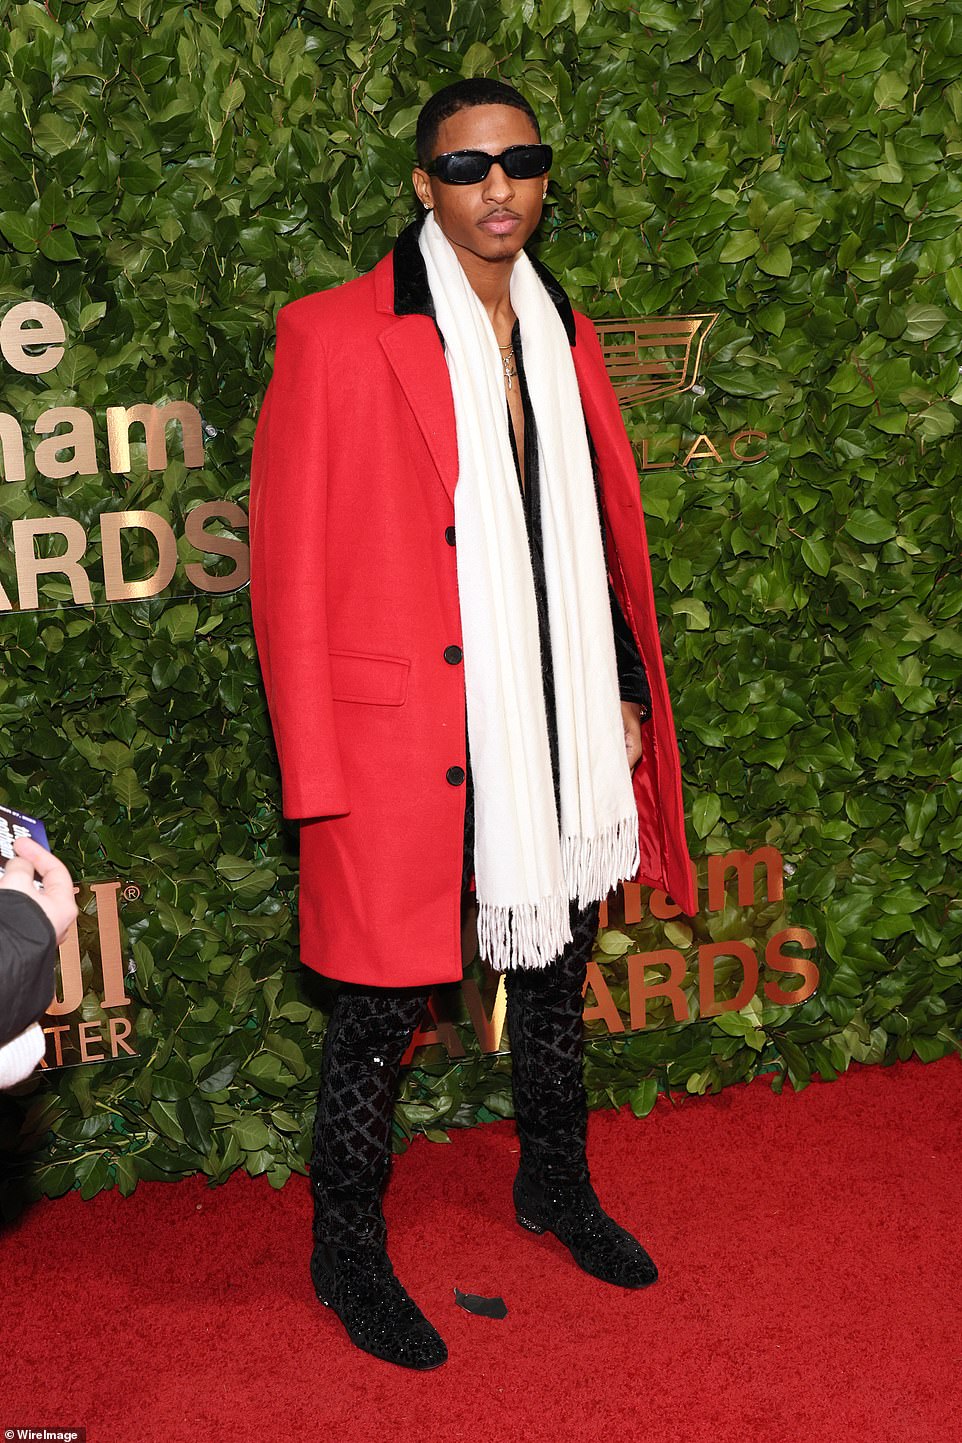 Myles Frost wore an oversized red jacket with black buttons, a white scarf and sunglasses